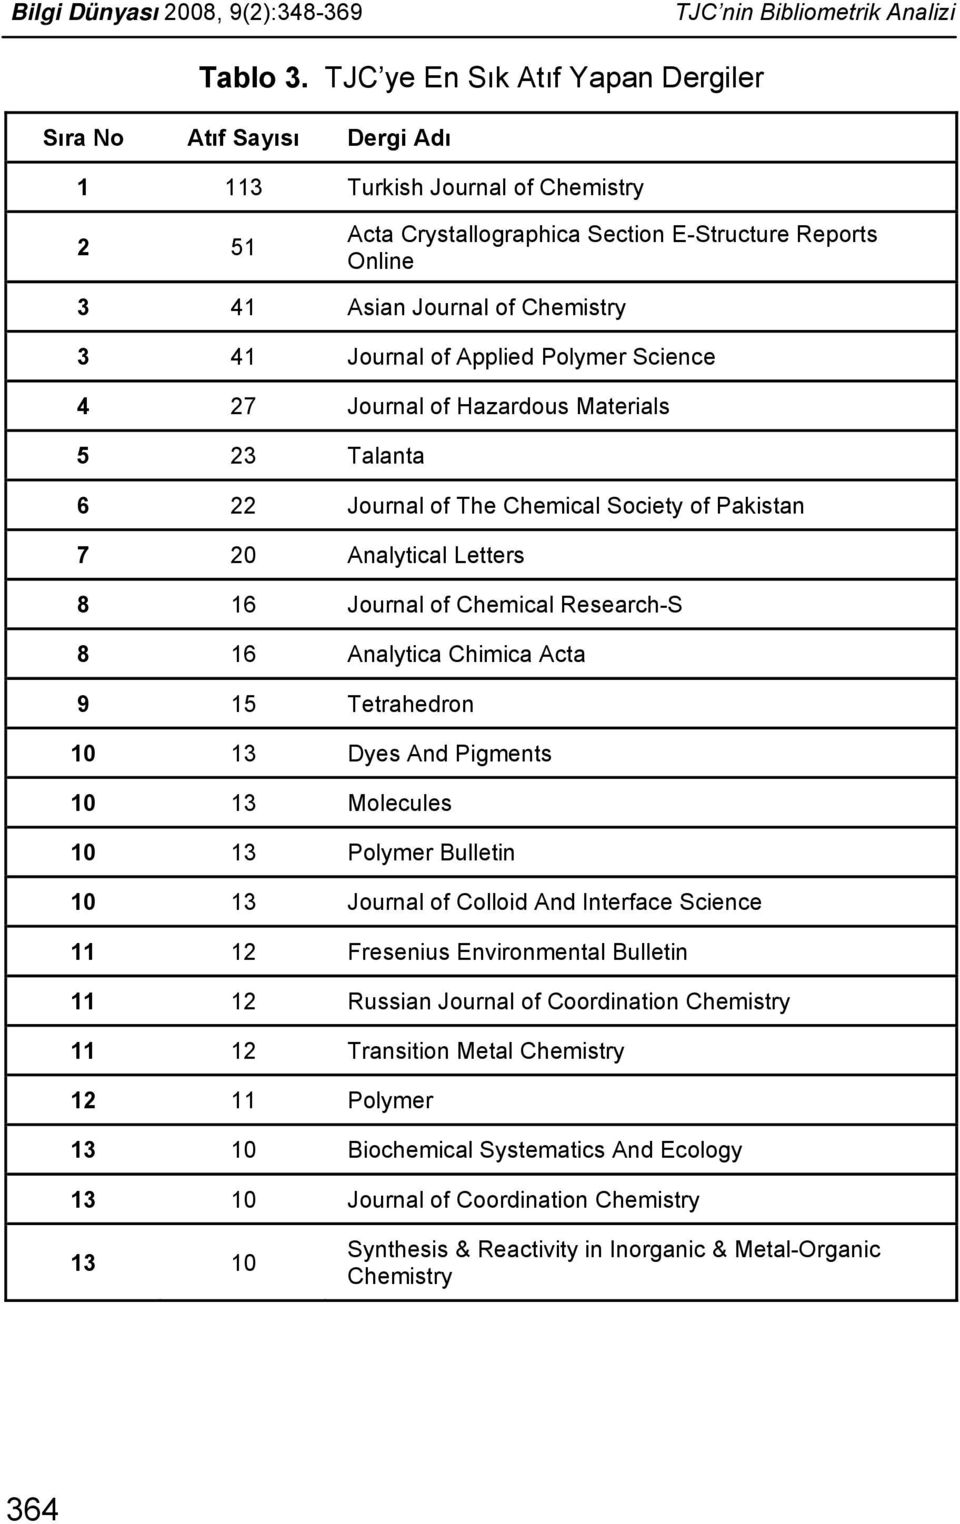 Journal of Applied Polymer Science 4 27 Journal of Hazardous Materials 5 23 Talanta 6 22 Journal of The Chemical Society of Pakistan 7 20 Analytical Letters 8 16 Journal of Chemical Research-S 8 16